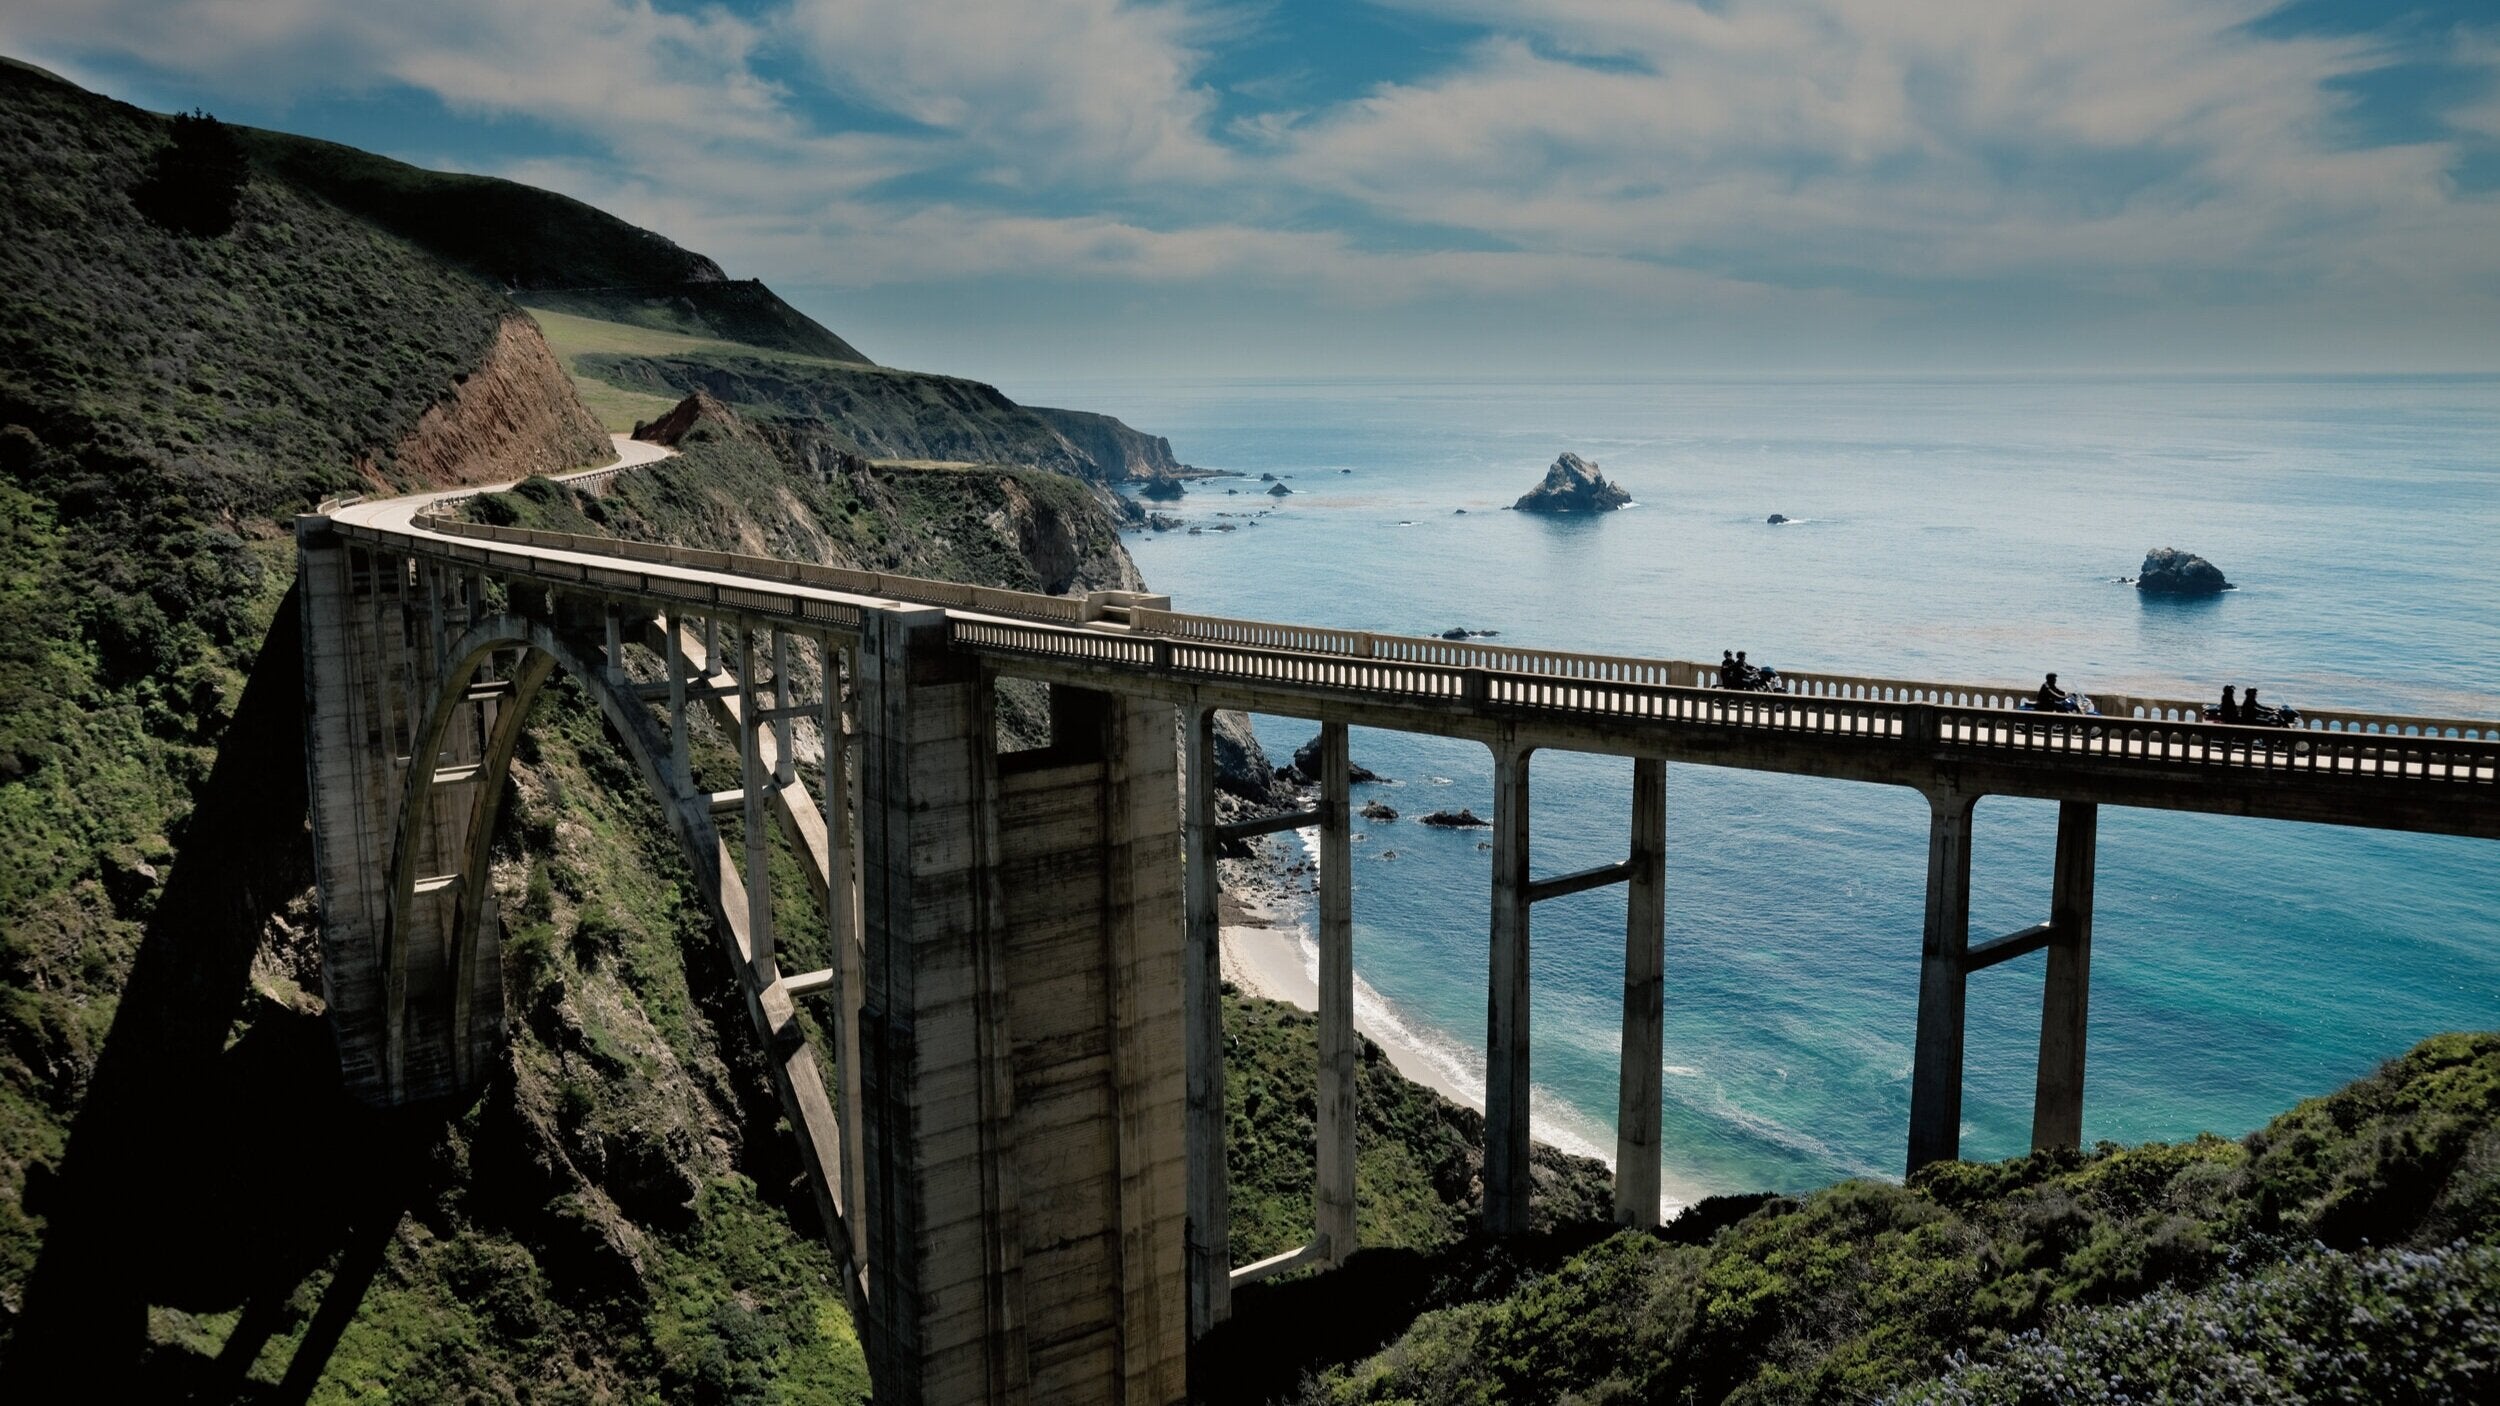 A majestic arched bridge spans a canyon, connecting verdant cliffs beside an azure sea. Silhouettes of motorcycles and riders cross the structure, contrasting the tranquil coastline and cloud-streaked sky.